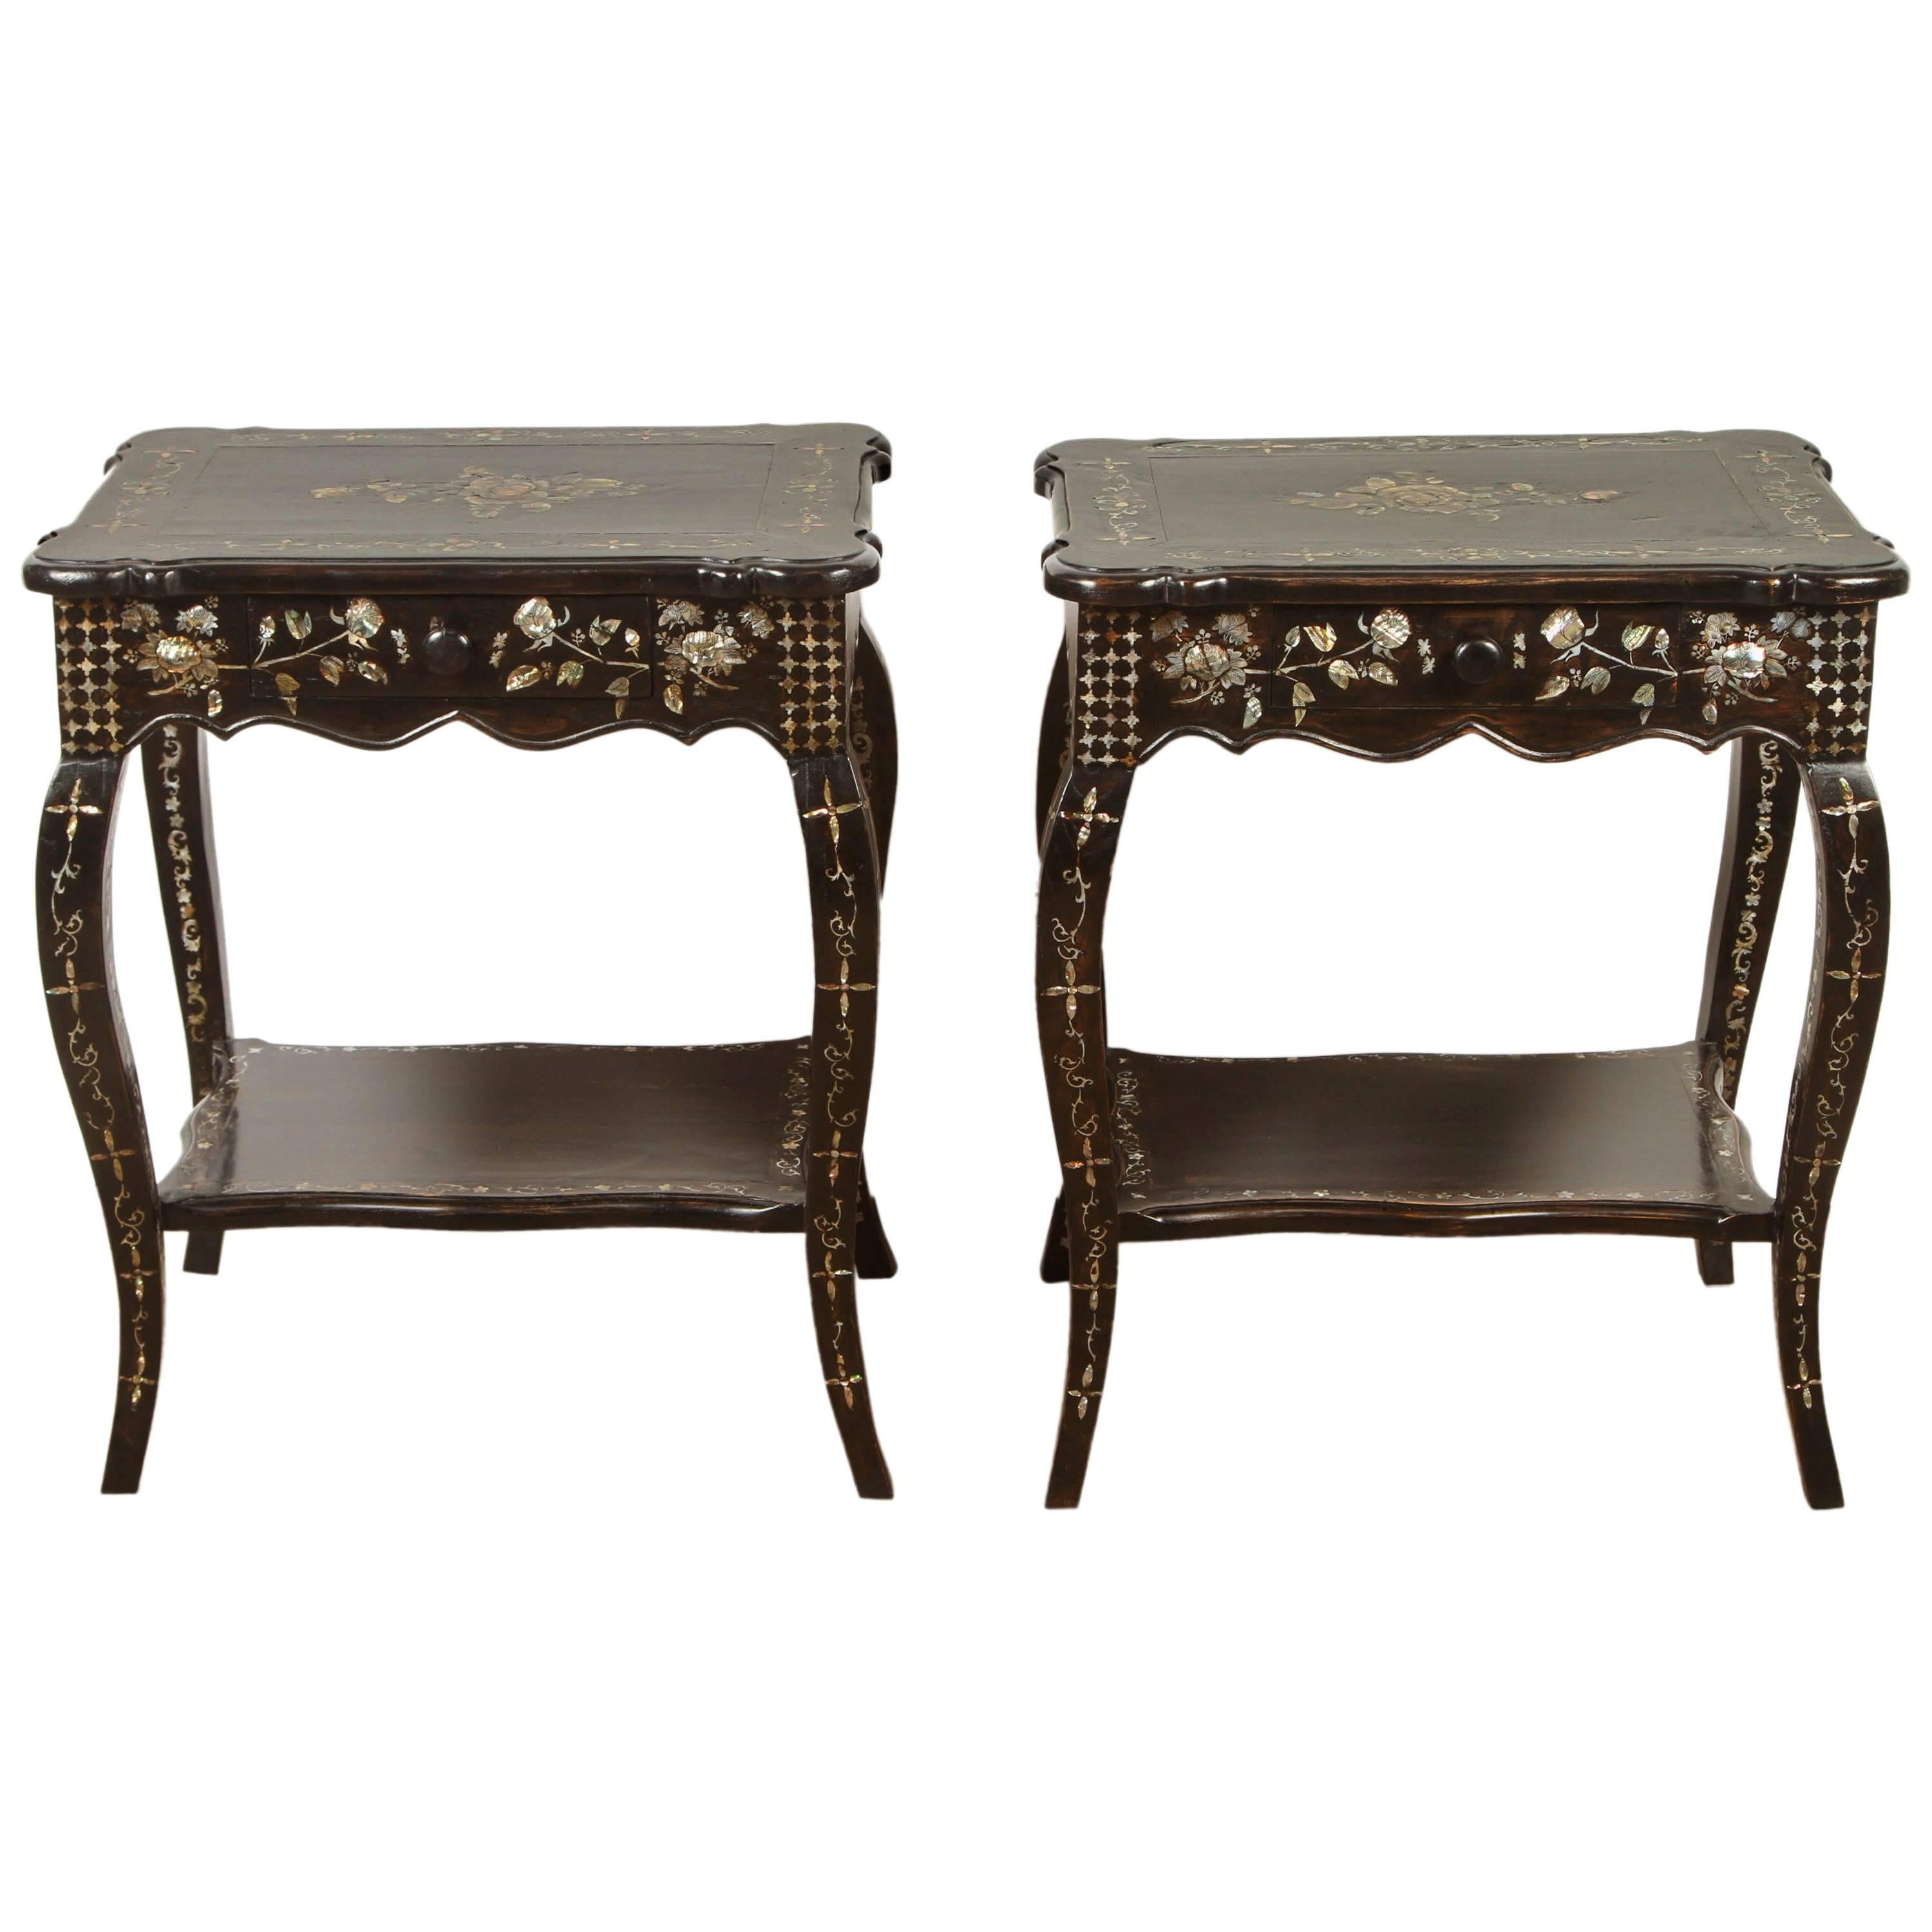 Pair of French Colonial Rosewood and Mother-of-Pearl Sidetables